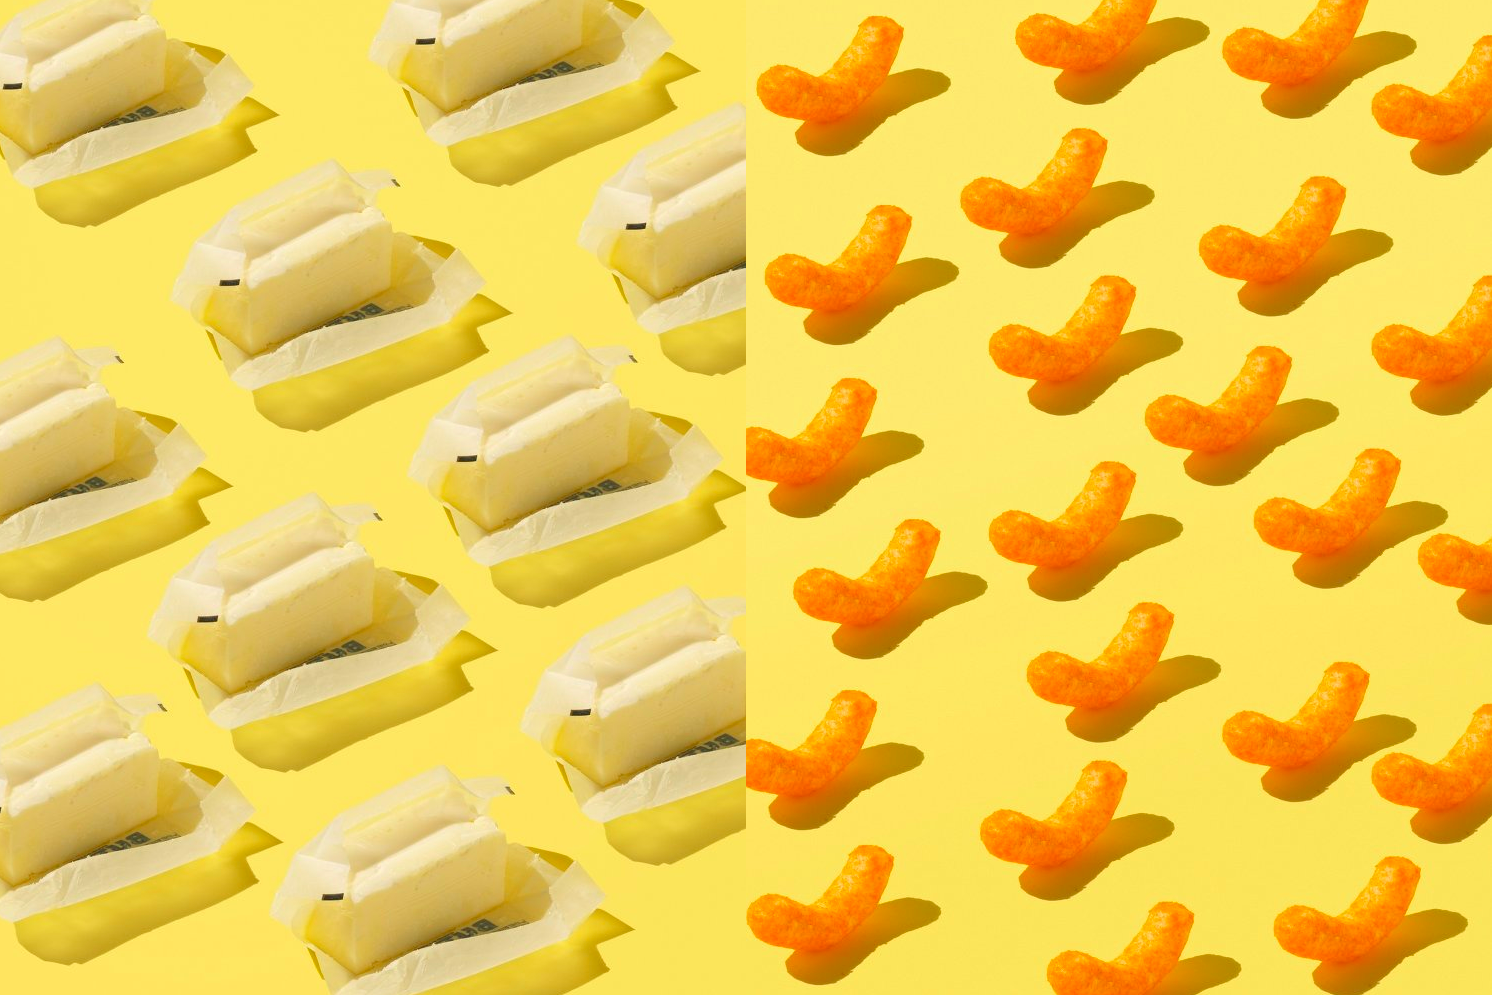 justin fantl makes a repetitious pattern from food